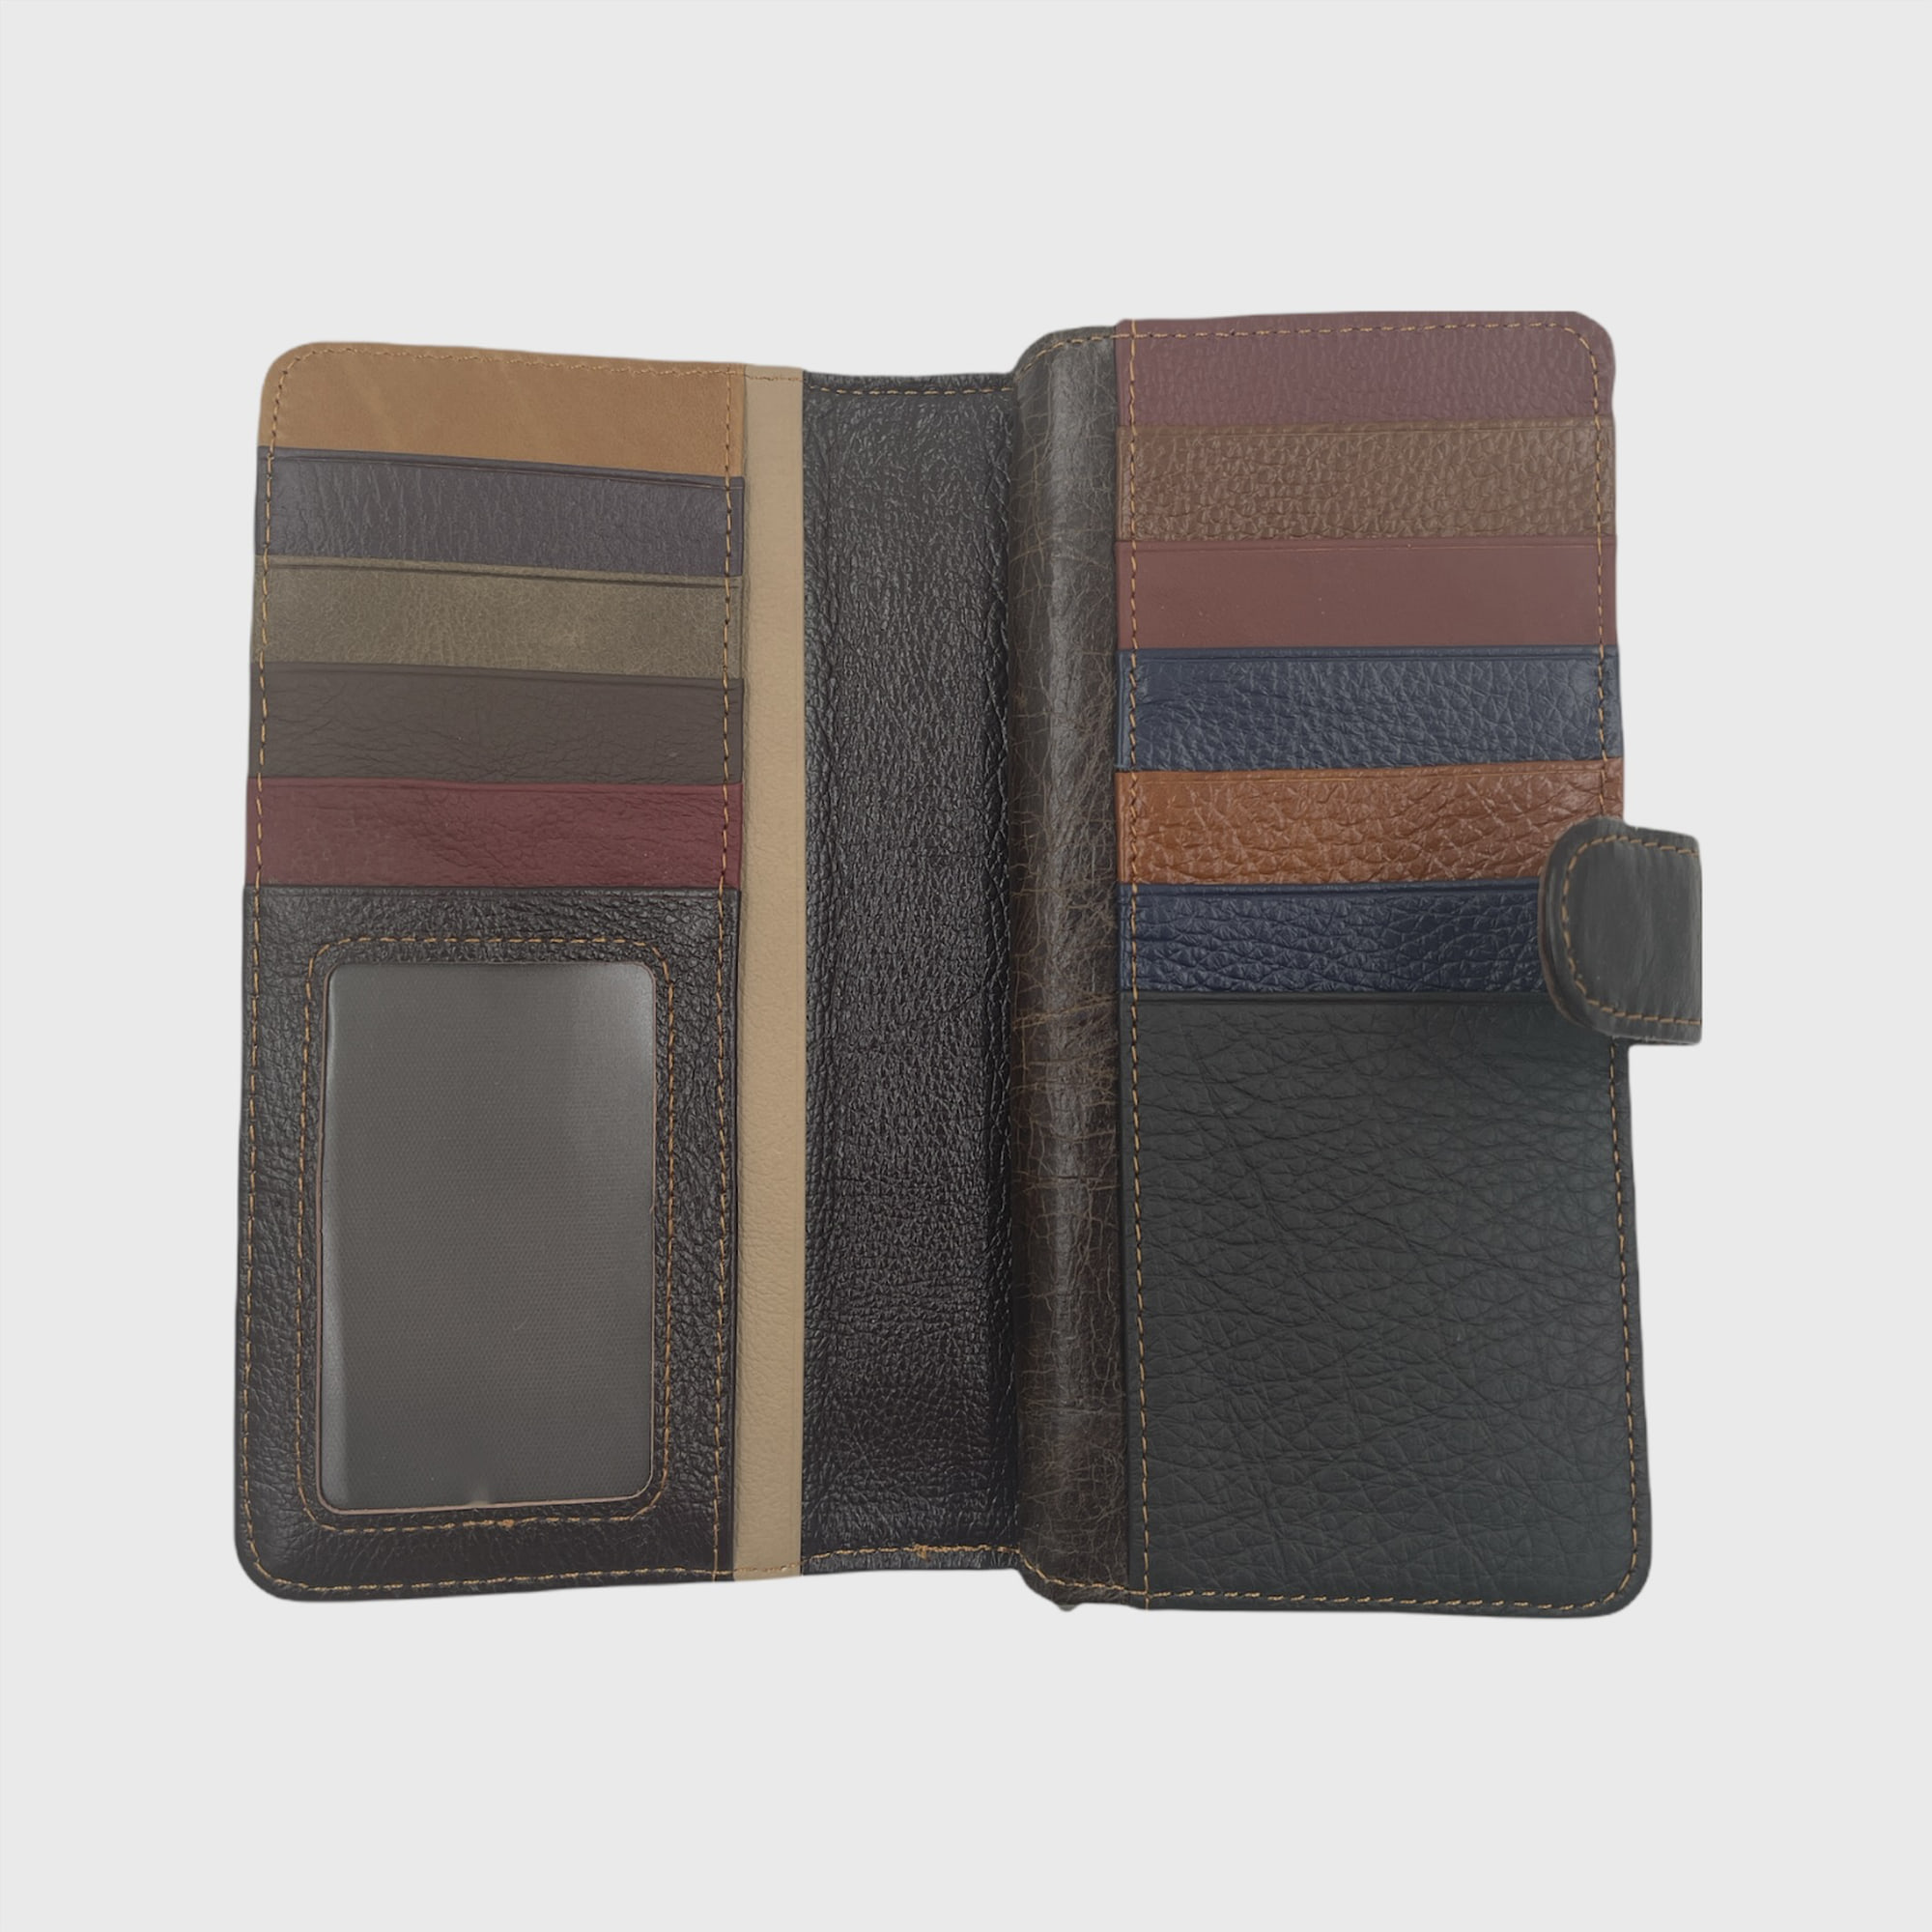 Leather wallet in various colors